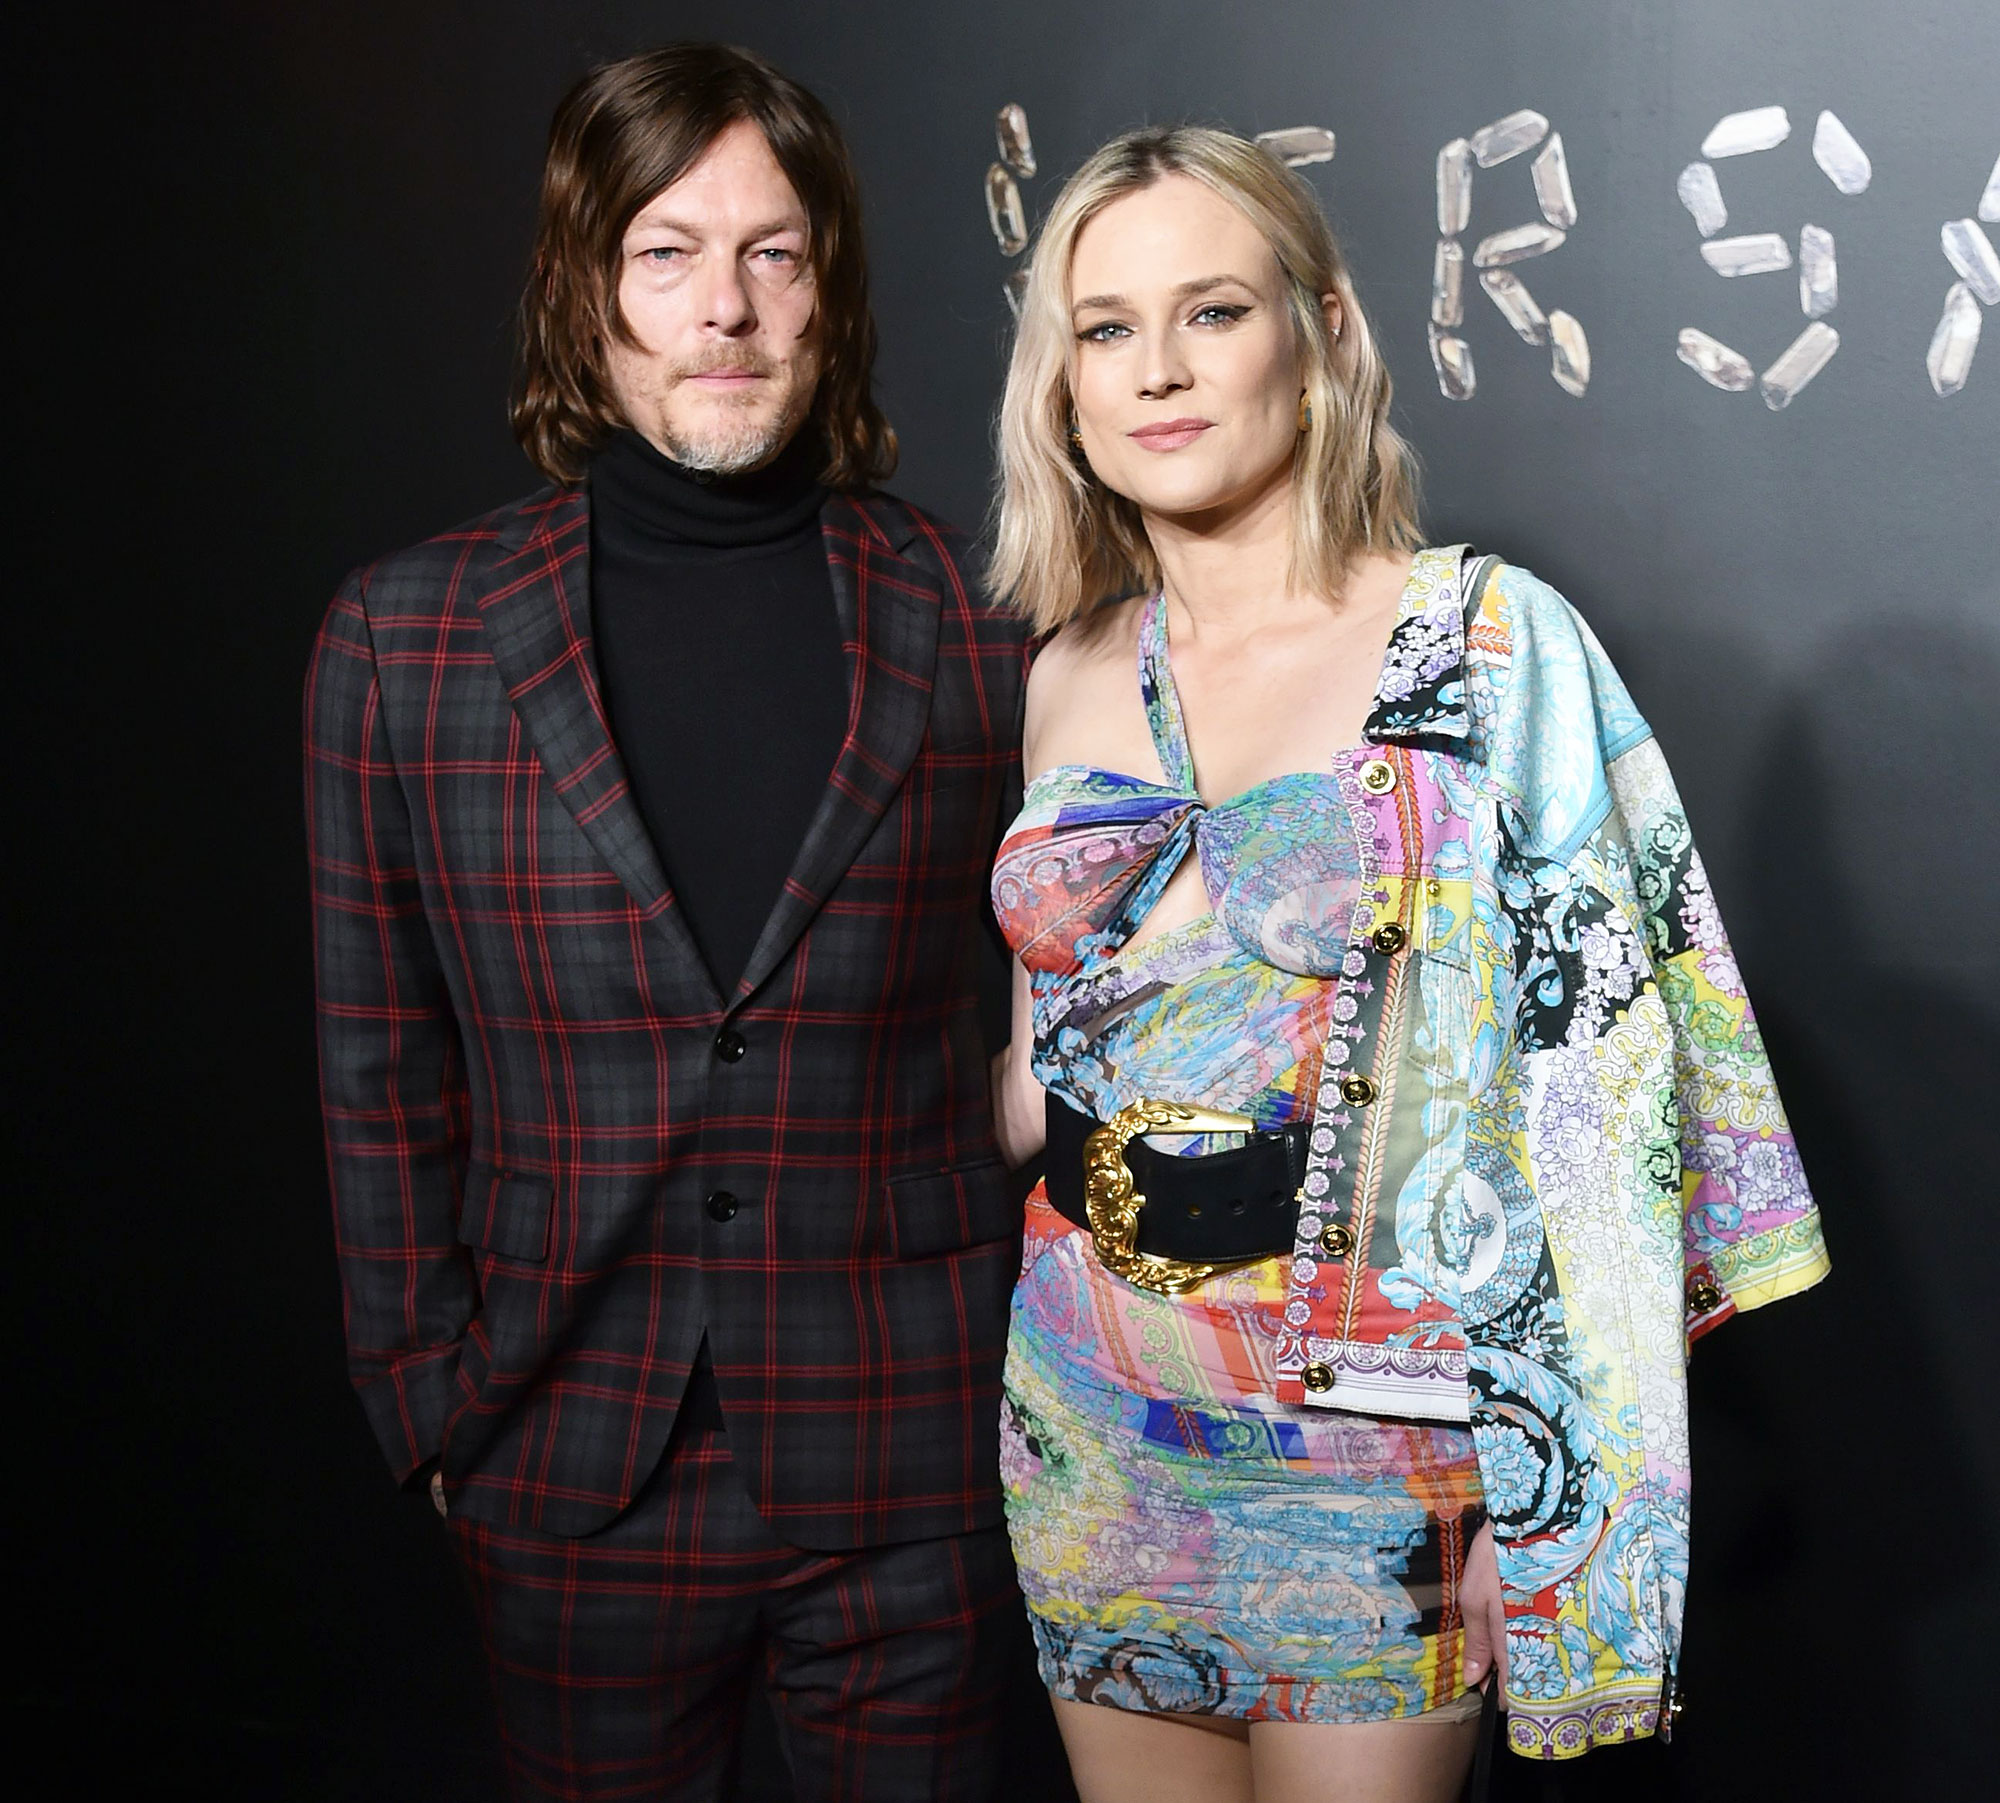 Diane Kruger Steps Out with Norman Reedus After Giving Birth